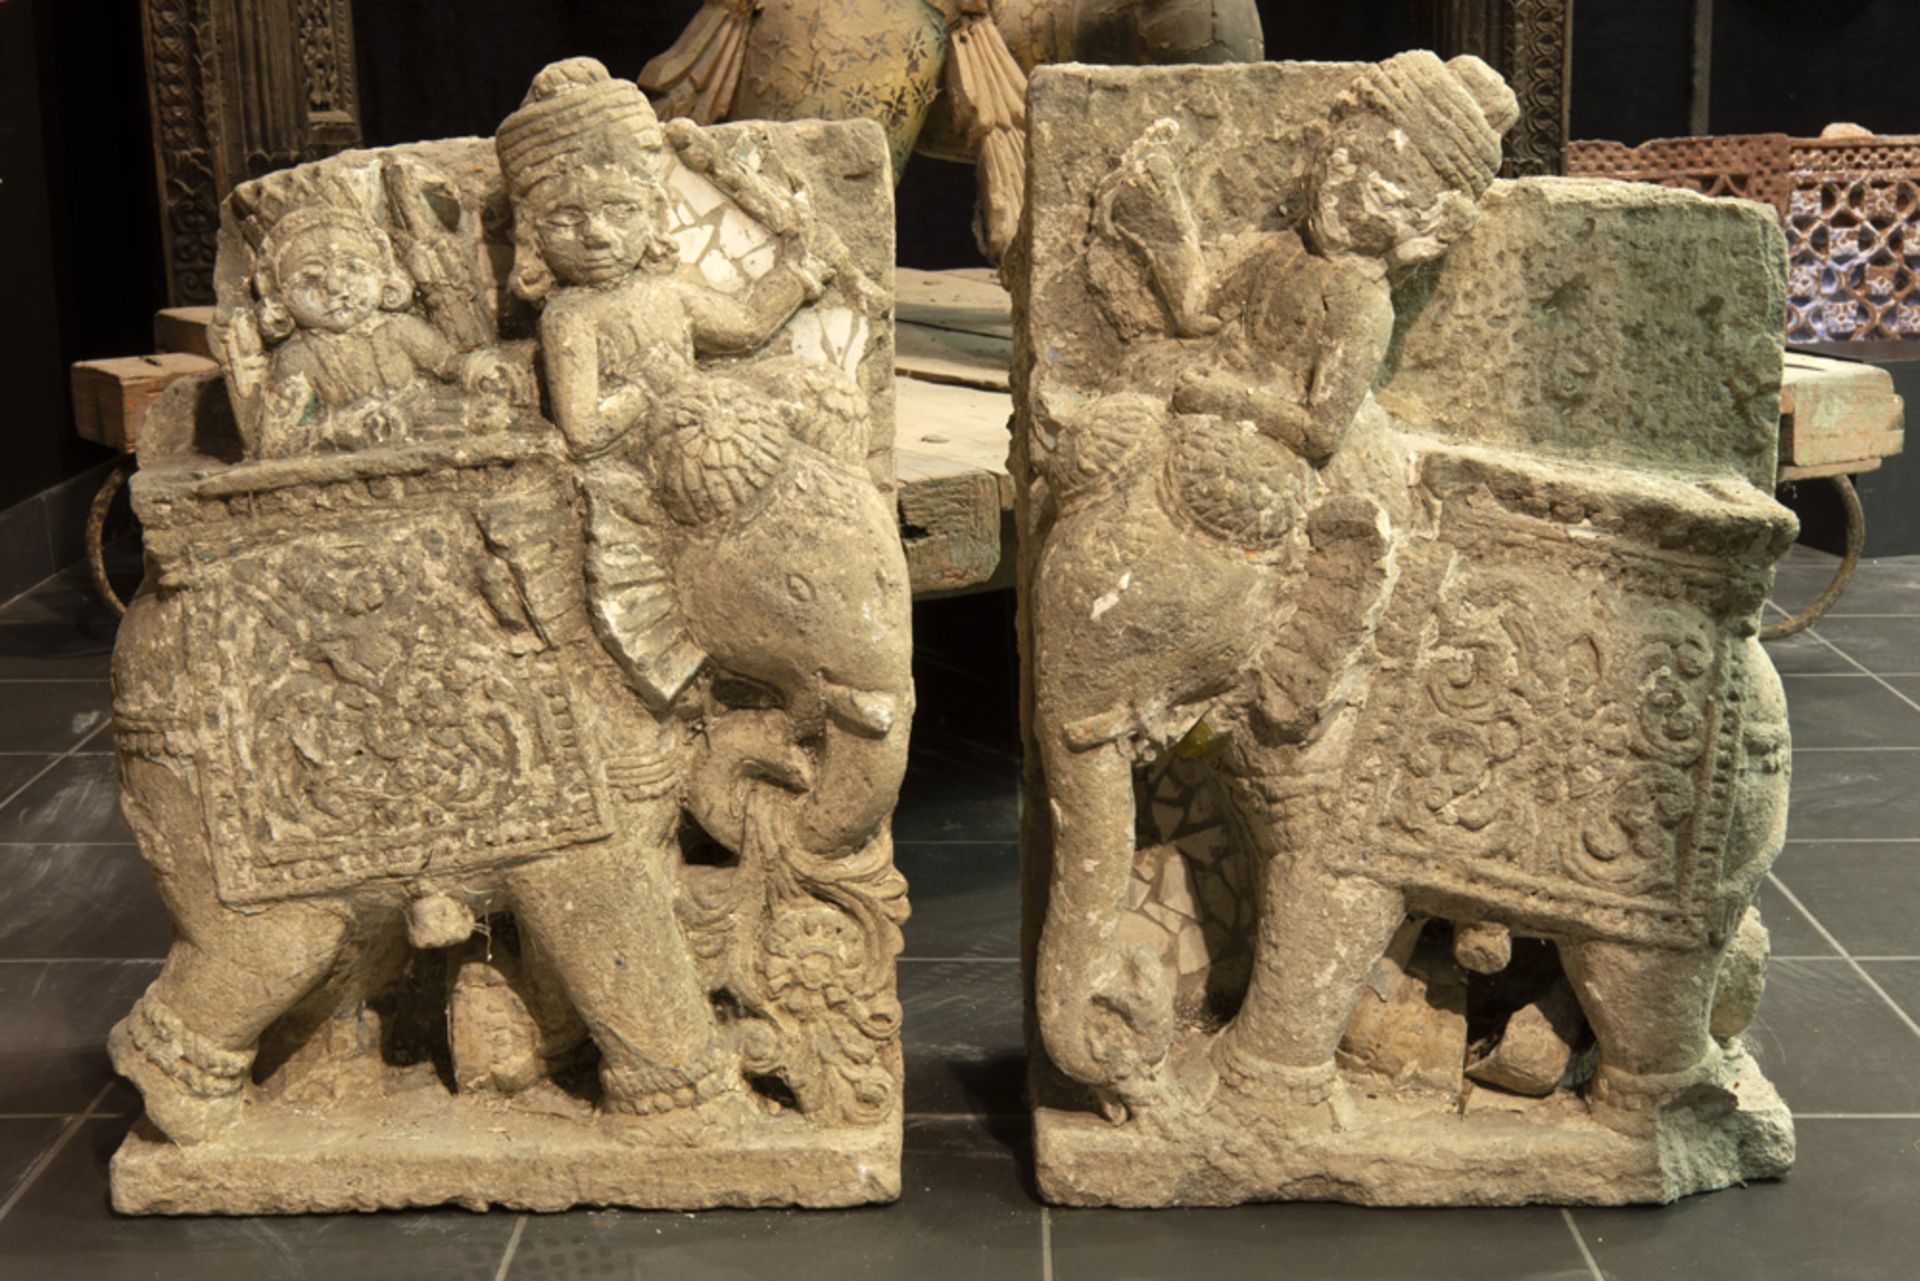 pair of 19th Cent. Indian stone sculptures from a haveli in Gujarat || INDIA / GUJARAT - 19° EEUW